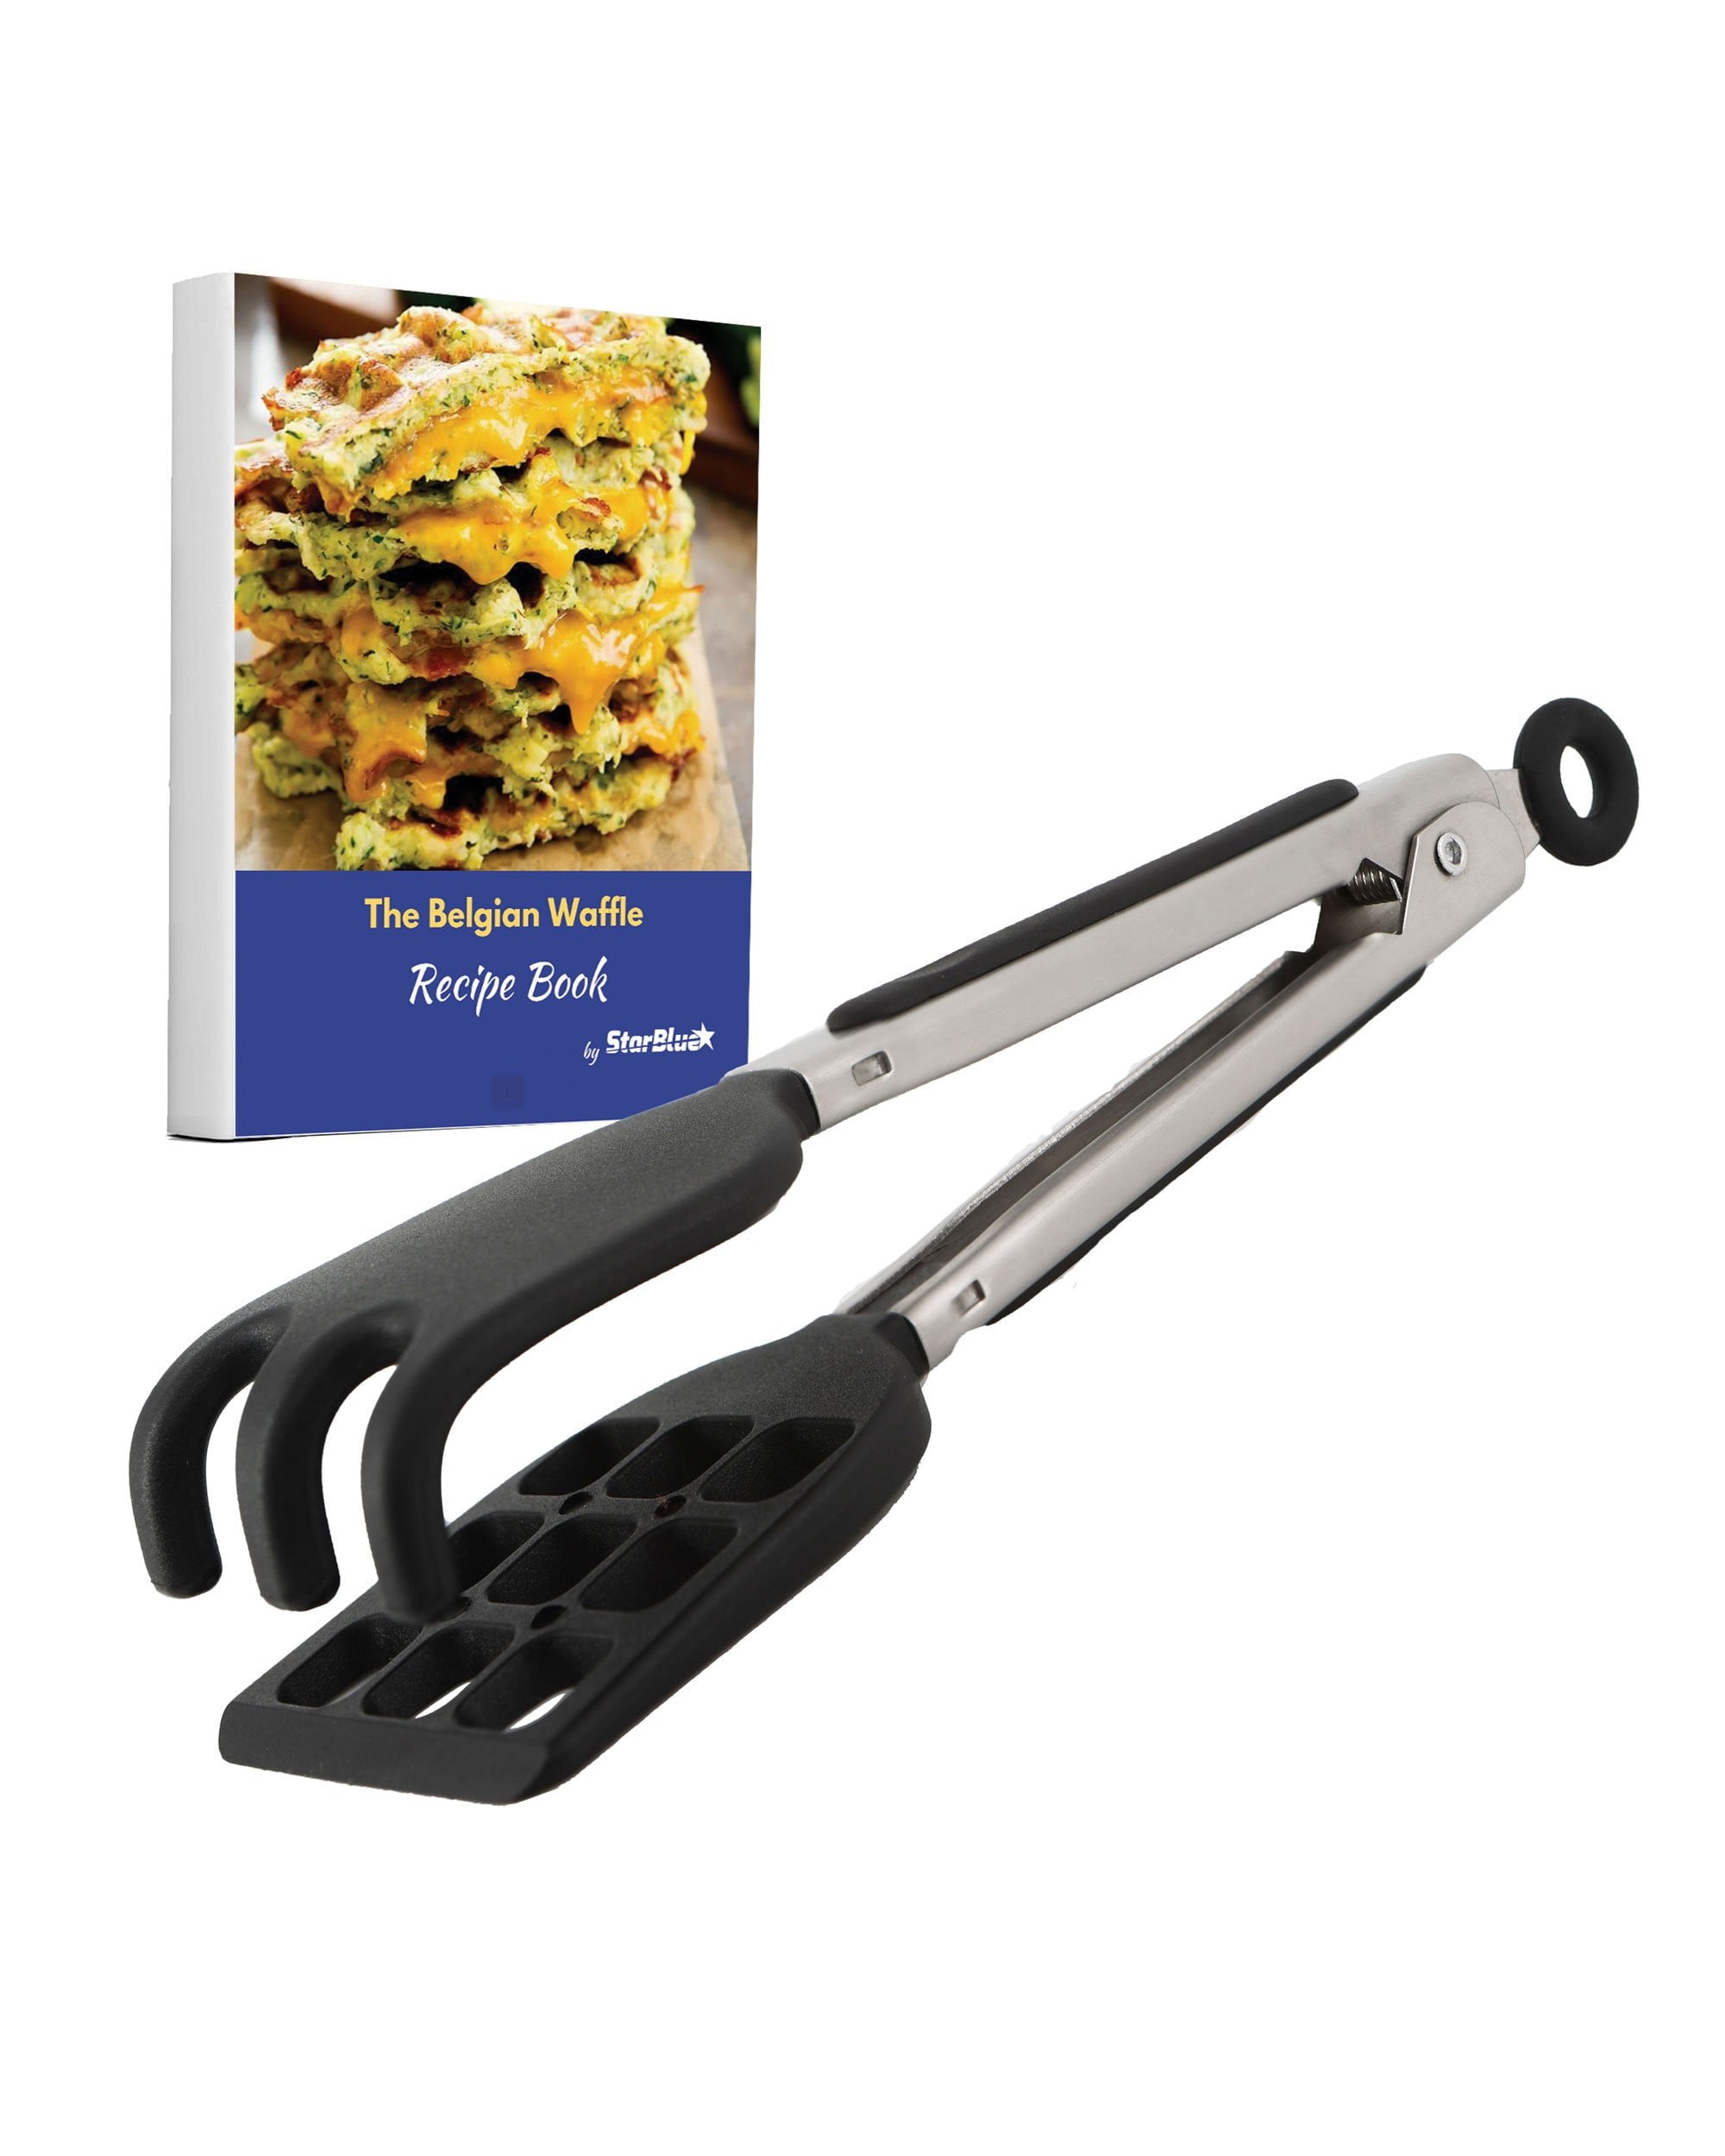 Mini Waffle Tongs by StarBlue – 8 Inches Silicone and Nylon Serving Tongs with Non-Slip Smooth Handles, Non-Scratch and Dishwasher Safe, Multipurpose